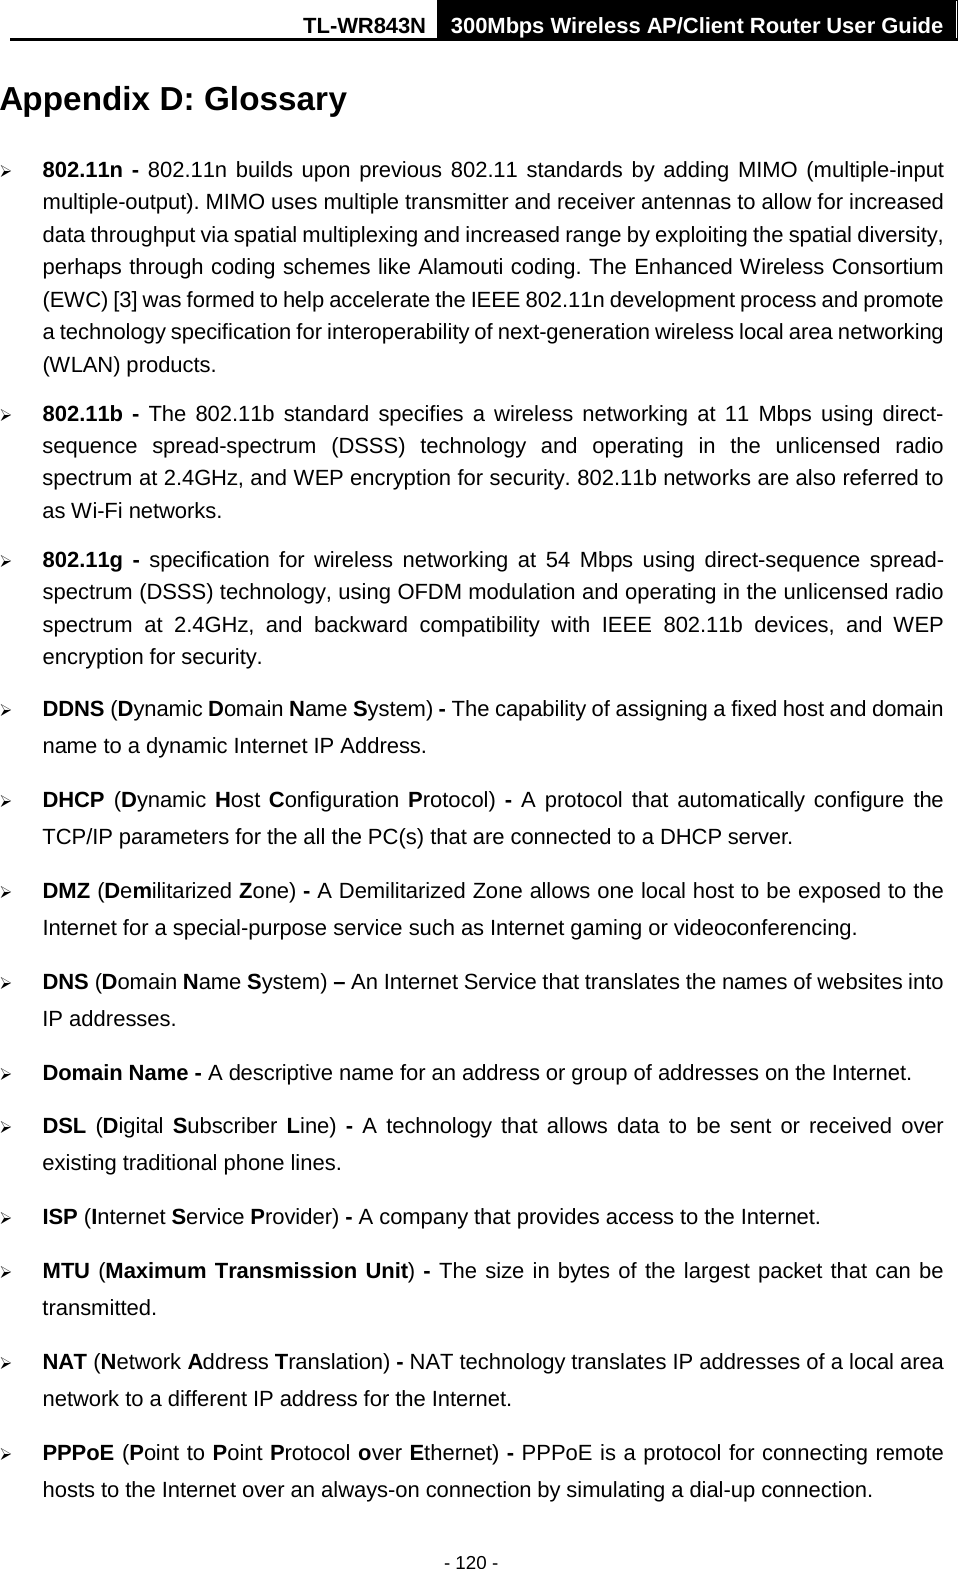 TL-WR843N 300Mbps Wireless AP/Client Router User Guide - 120 - Appendix D: Glossary 802.11n - 802.11n builds upon previous 802.11 standards by adding MIMO (multiple-inputmultiple-output). MIMO uses multiple transmitter and receiver antennas to allow for increaseddata throughput via spatial multiplexing and increased range by exploiting the spatial diversity,perhaps through coding schemes like Alamouti coding. The Enhanced Wireless Consortium(EWC) [3] was formed to help accelerate the IEEE 802.11n development process and promotea technology specification for interoperability of next-generation wireless local area networking(WLAN) products.802.11b - The 802.11b standard specifies a wireless networking at 11 Mbps using direct-sequence spread-spectrum (DSSS) technology and operating in the unlicensed radiospectrum at 2.4GHz, and WEP encryption for security. 802.11b networks are also referred toas Wi-Fi networks.802.11g - specification for wireless networking at 54 Mbps using direct-sequence spread-spectrum (DSSS) technology, using OFDM modulation and operating in the unlicensed radiospectrum at 2.4GHz, and backward compatibility with IEEE 802.11b devices, and WEPencryption for security.DDNS (Dynamic Domain Name System) - The capability of assigning a fixed host and domainname to a dynamic Internet IP Address.DHCP (Dynamic Host Configuration Protocol) - A protocol that automatically configure theTCP/IP parameters for the all the PC(s) that are connected to a DHCP server.DMZ (Demilitarized Zone) - A Demilitarized Zone allows one local host to be exposed to theInternet for a special-purpose service such as Internet gaming or videoconferencing.DNS (Domain Name System) – An Internet Service that translates the names of websites intoIP addresses.Domain Name - A descriptive name for an address or group of addresses on the Internet.DSL (Digital Subscriber Line) - A technology that allows data to be sent or received overexisting traditional phone lines.ISP (Internet Service Provider) - A company that provides access to the Internet.MTU (Maximum Transmission Unit) - The size in bytes of the largest packet that can betransmitted.NAT (Network Address Translation) - NAT technology translates IP addresses of a local areanetwork to a different IP address for the Internet.PPPoE (Point to Point Protocol over Ethernet) - PPPoE is a protocol for connecting remotehosts to the Internet over an always-on connection by simulating a dial-up connection.